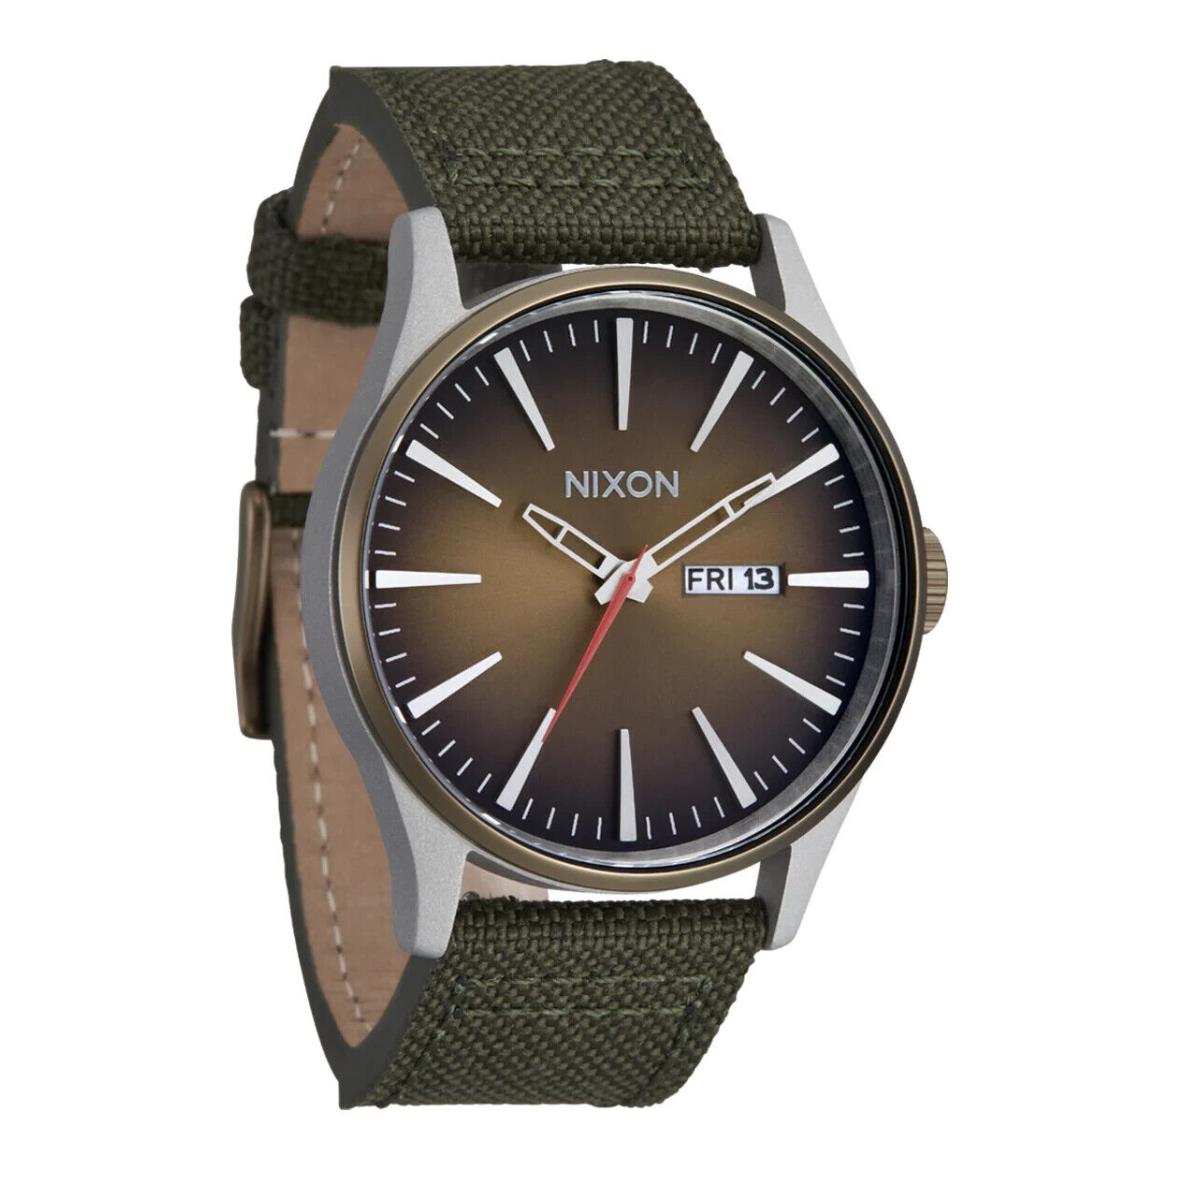 Nixon Sentry Nylon Watch - Silver / Lt Brown / Forest - Dial: Brown, Band: Brown, Bezel: Brown